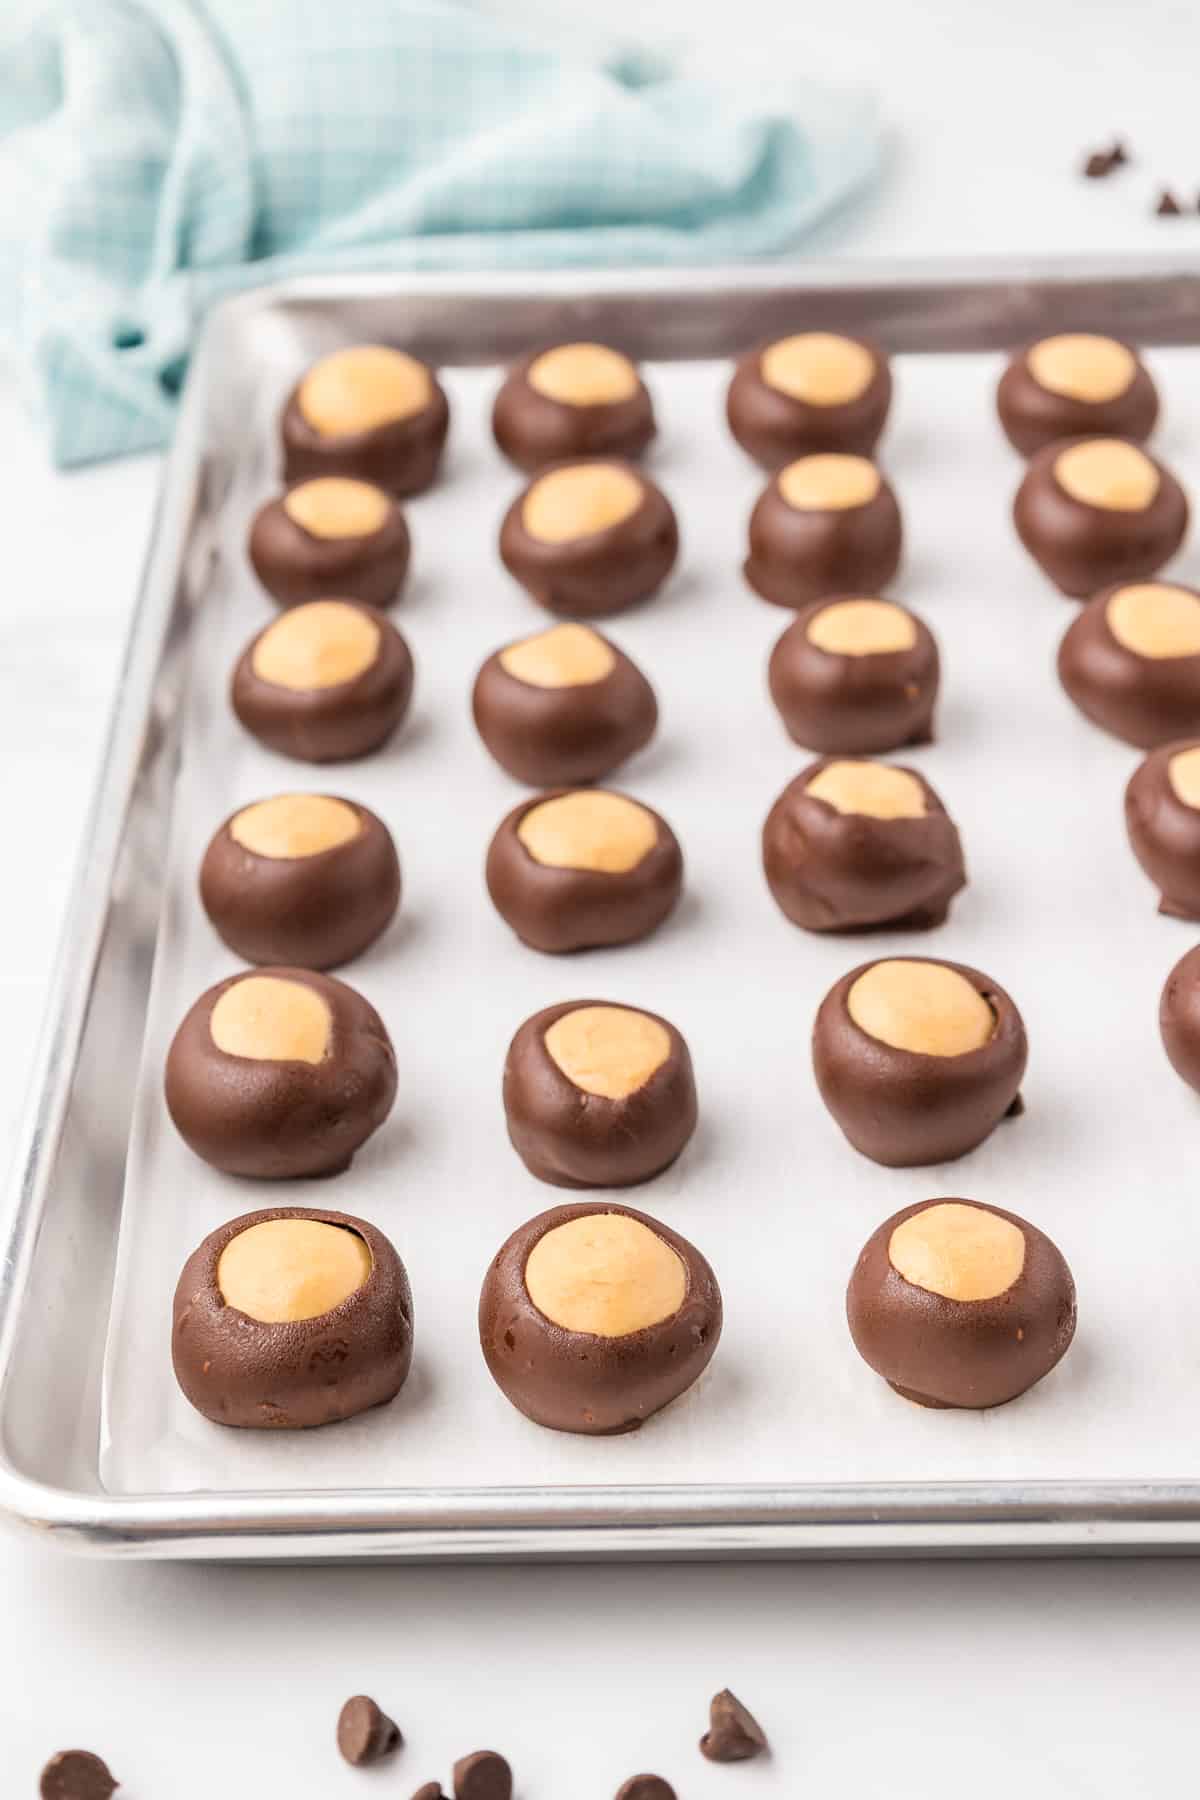 Buckeyes dipped in chocolate lined up in rows on a cookie sheet.